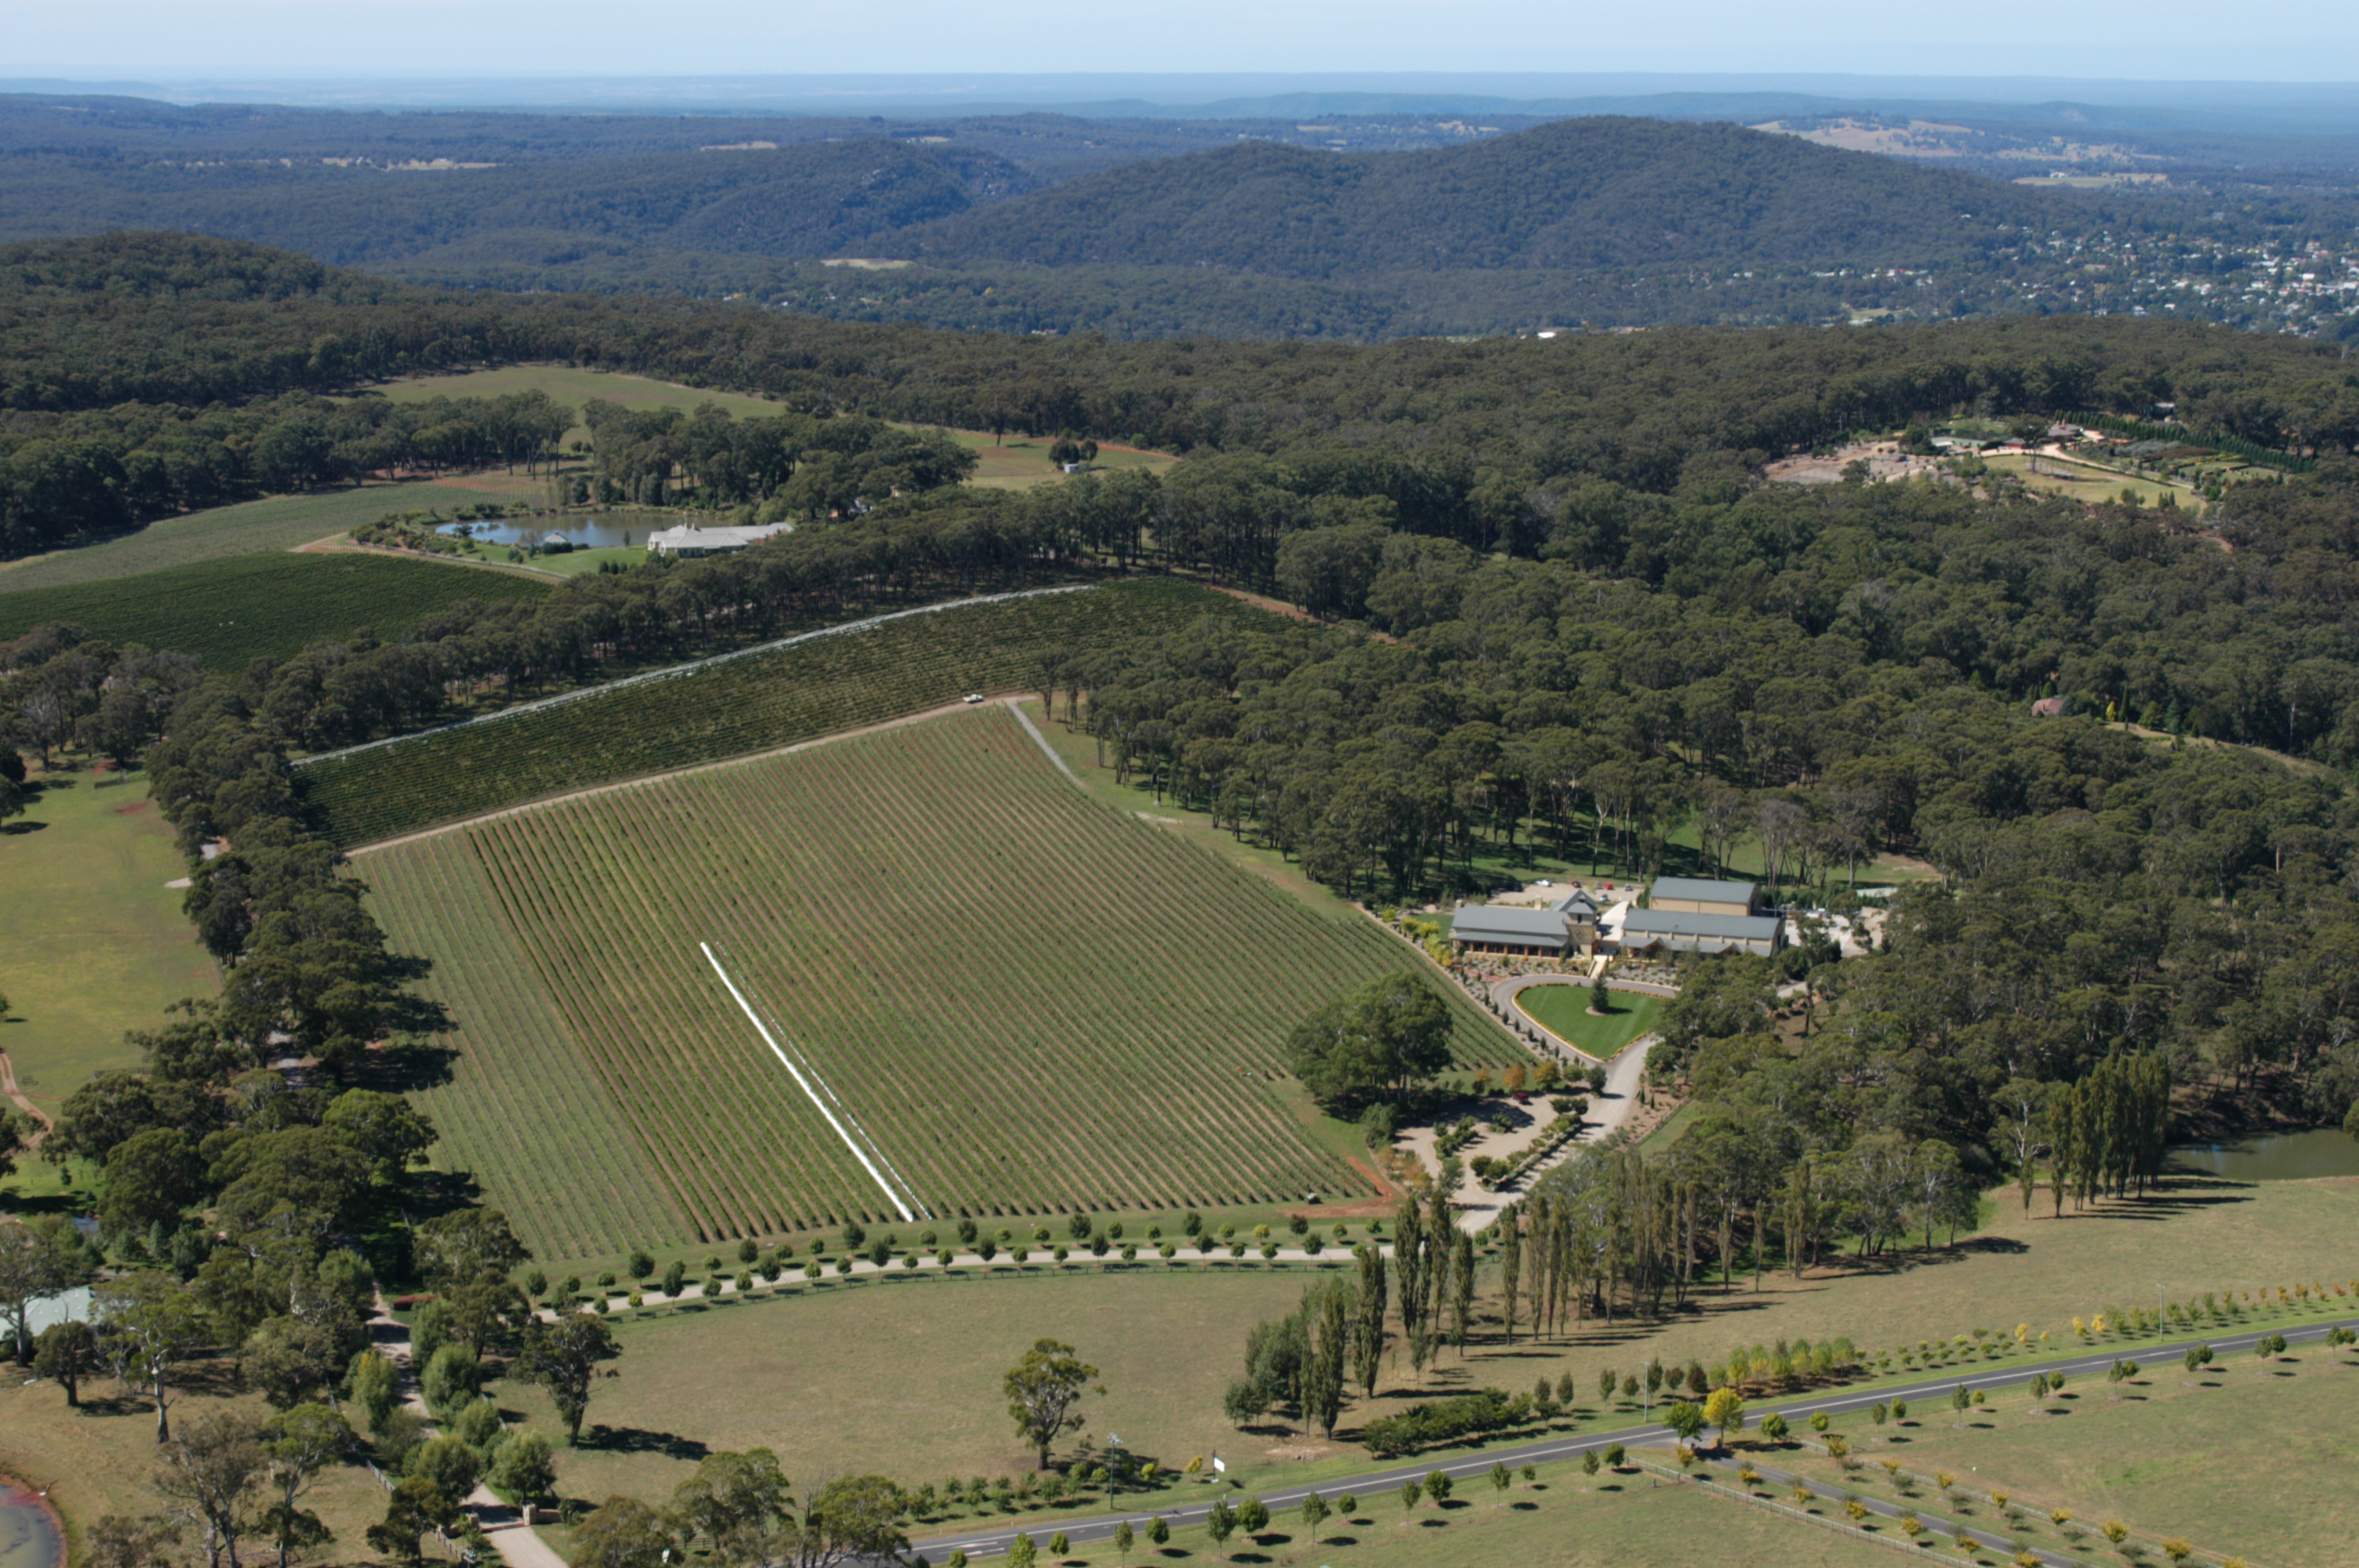 Centennial Vineyards with Mittagong in the background. Image supplied by Centennial Vineyards.